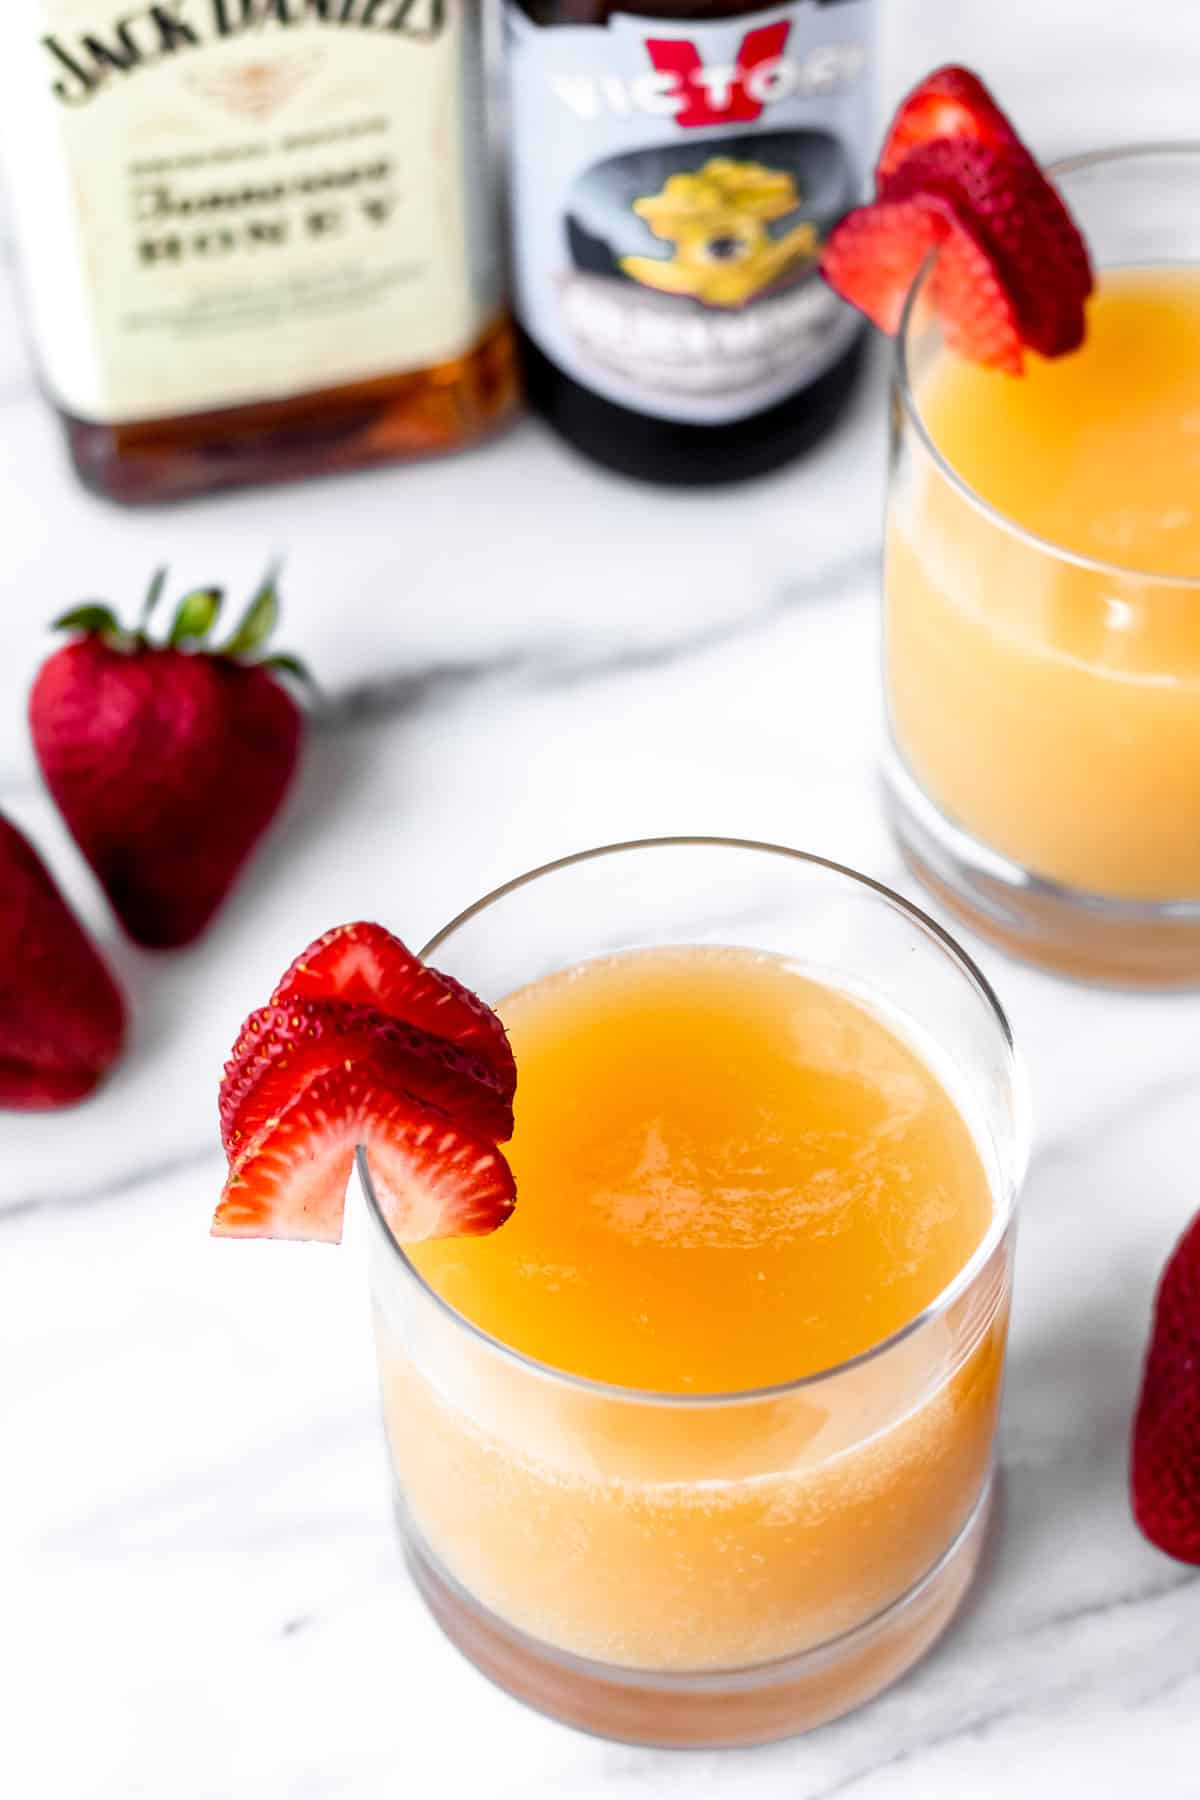 Two manmosa cocktails with strawberries and the bottles of whiskey and beer used to make them.